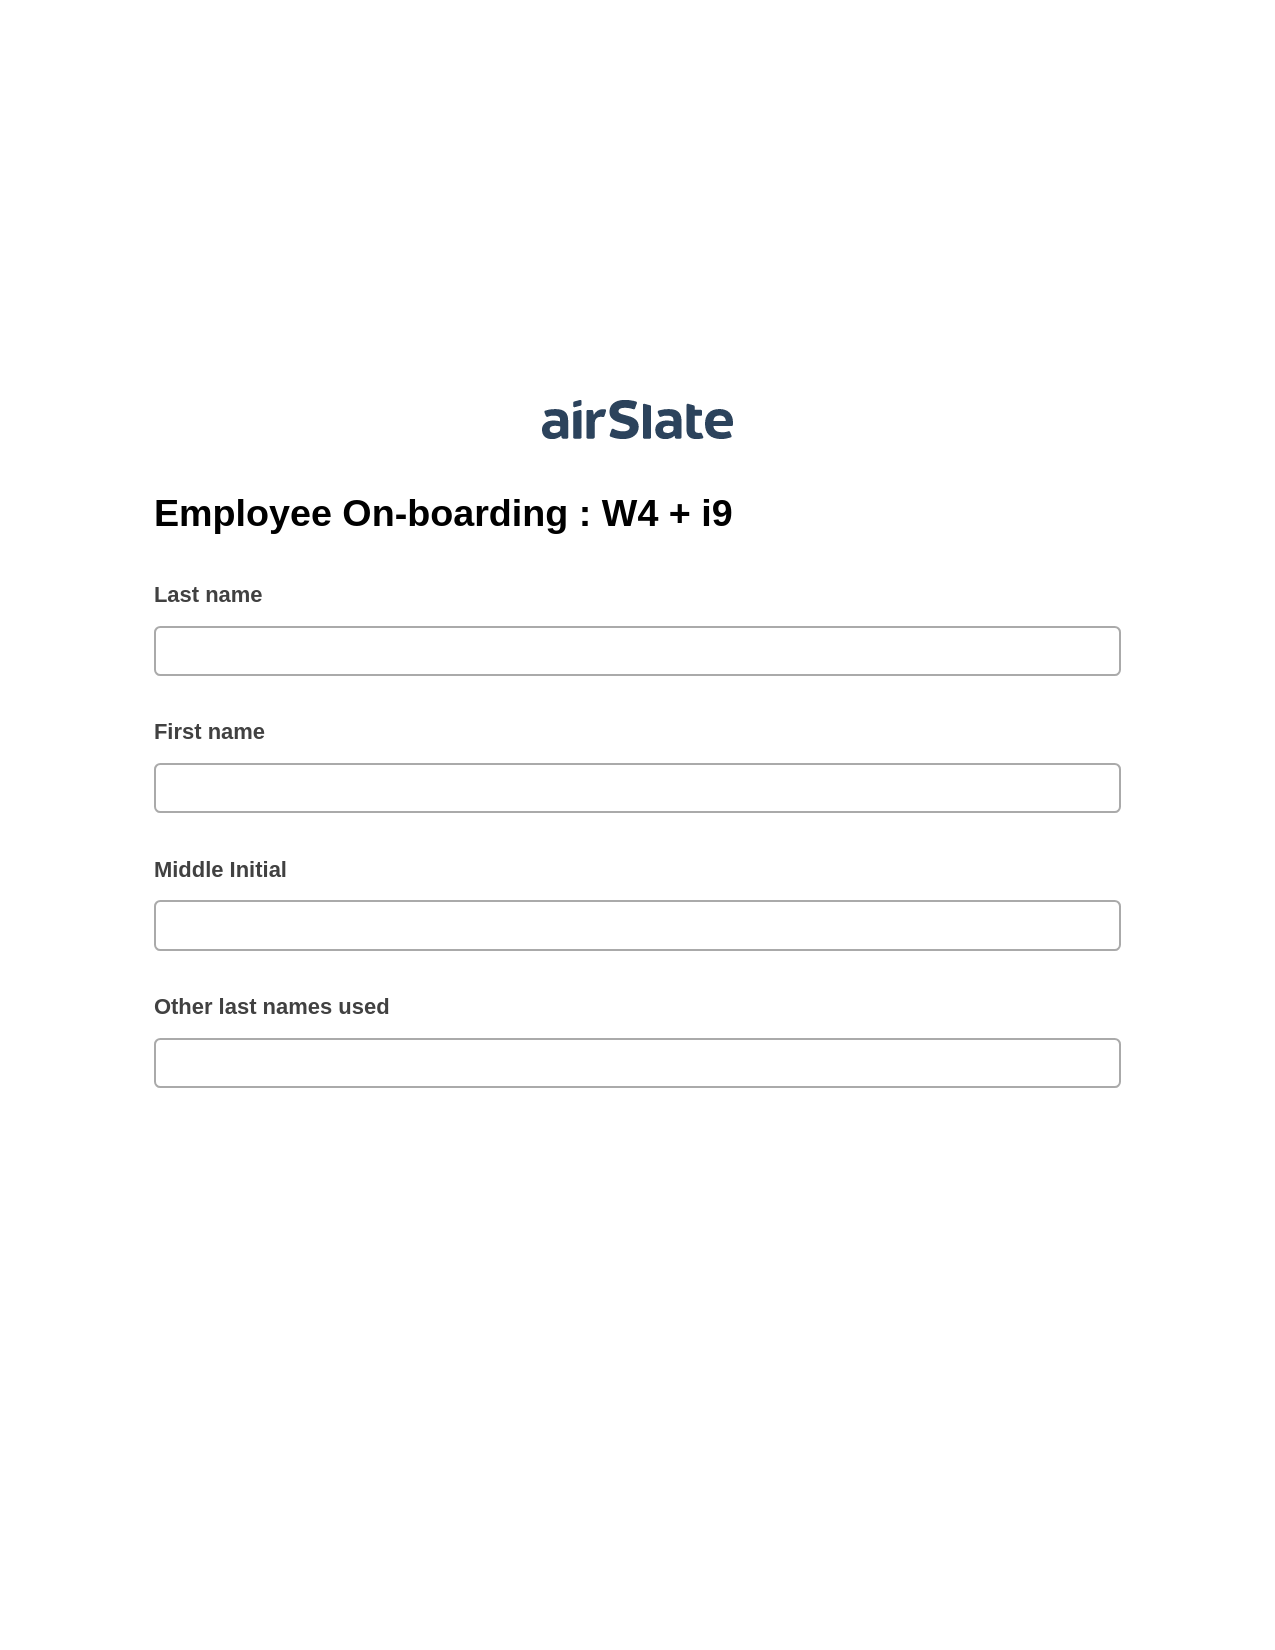 Employee On-boarding : W4 + i9 Pre-fill Dropdowns from Excel Bot, Set Signature Type Bot, Export to Excel 365 Bot